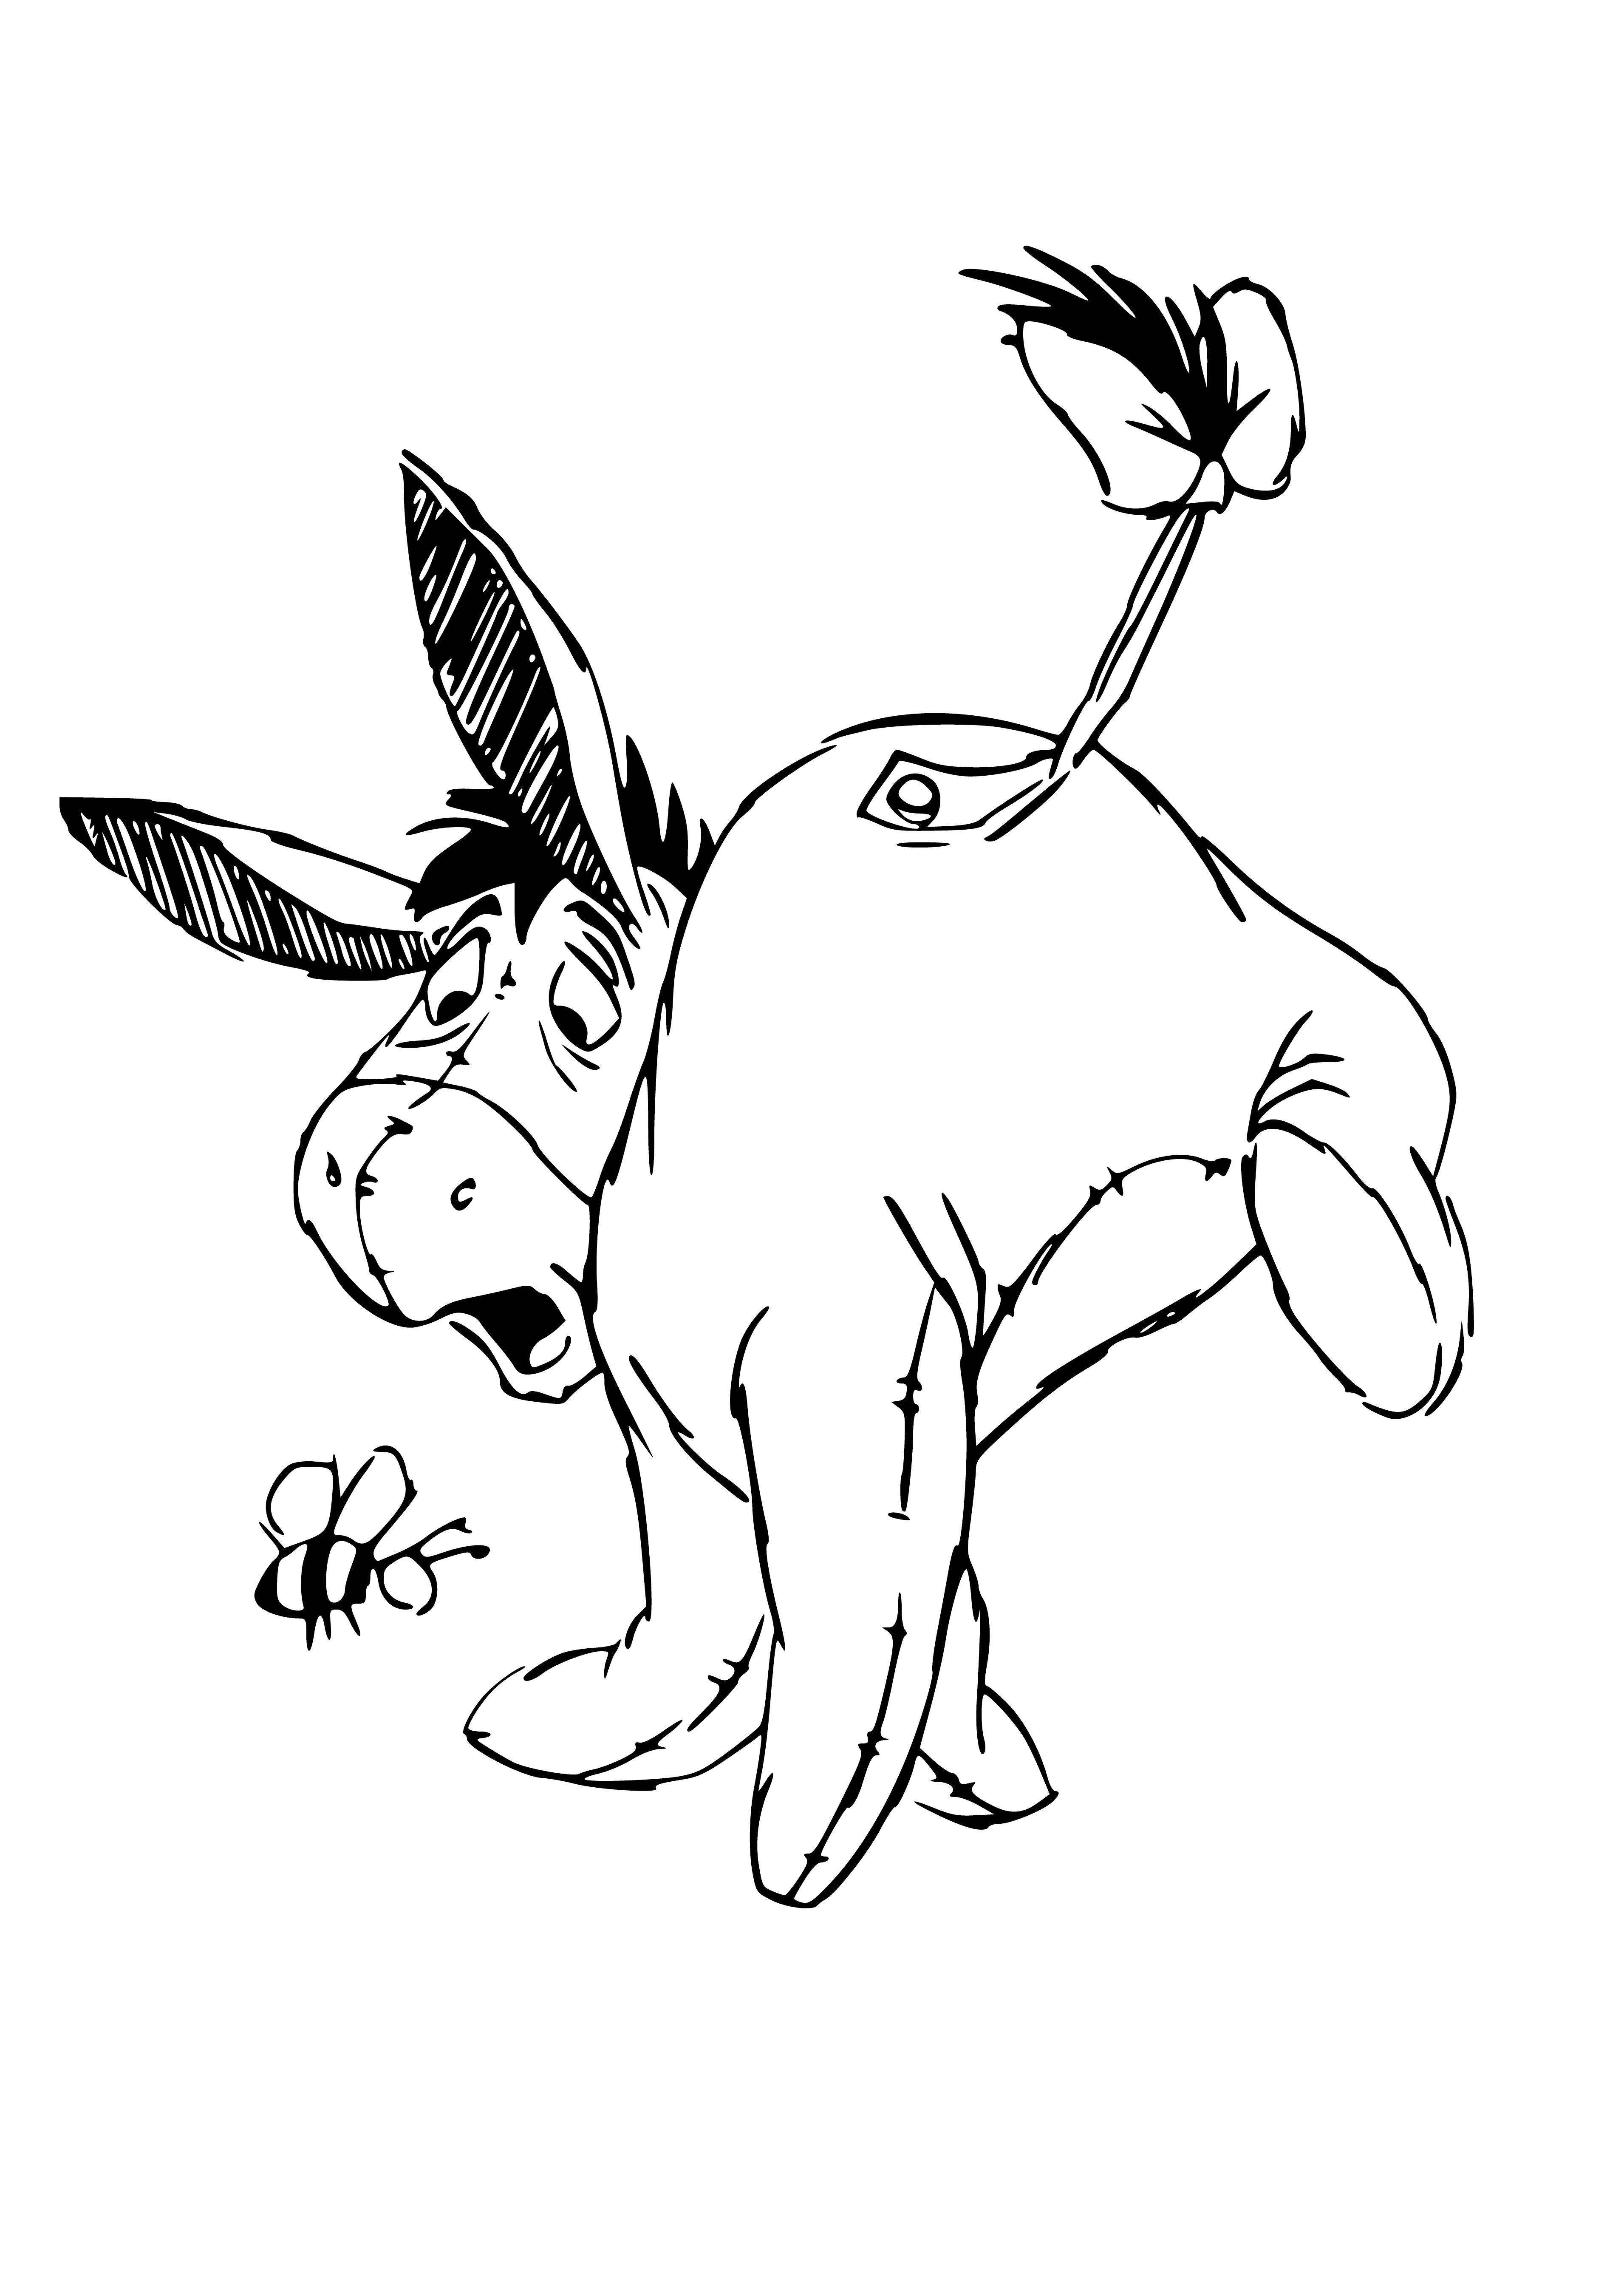 A donkey and a bee coloring page